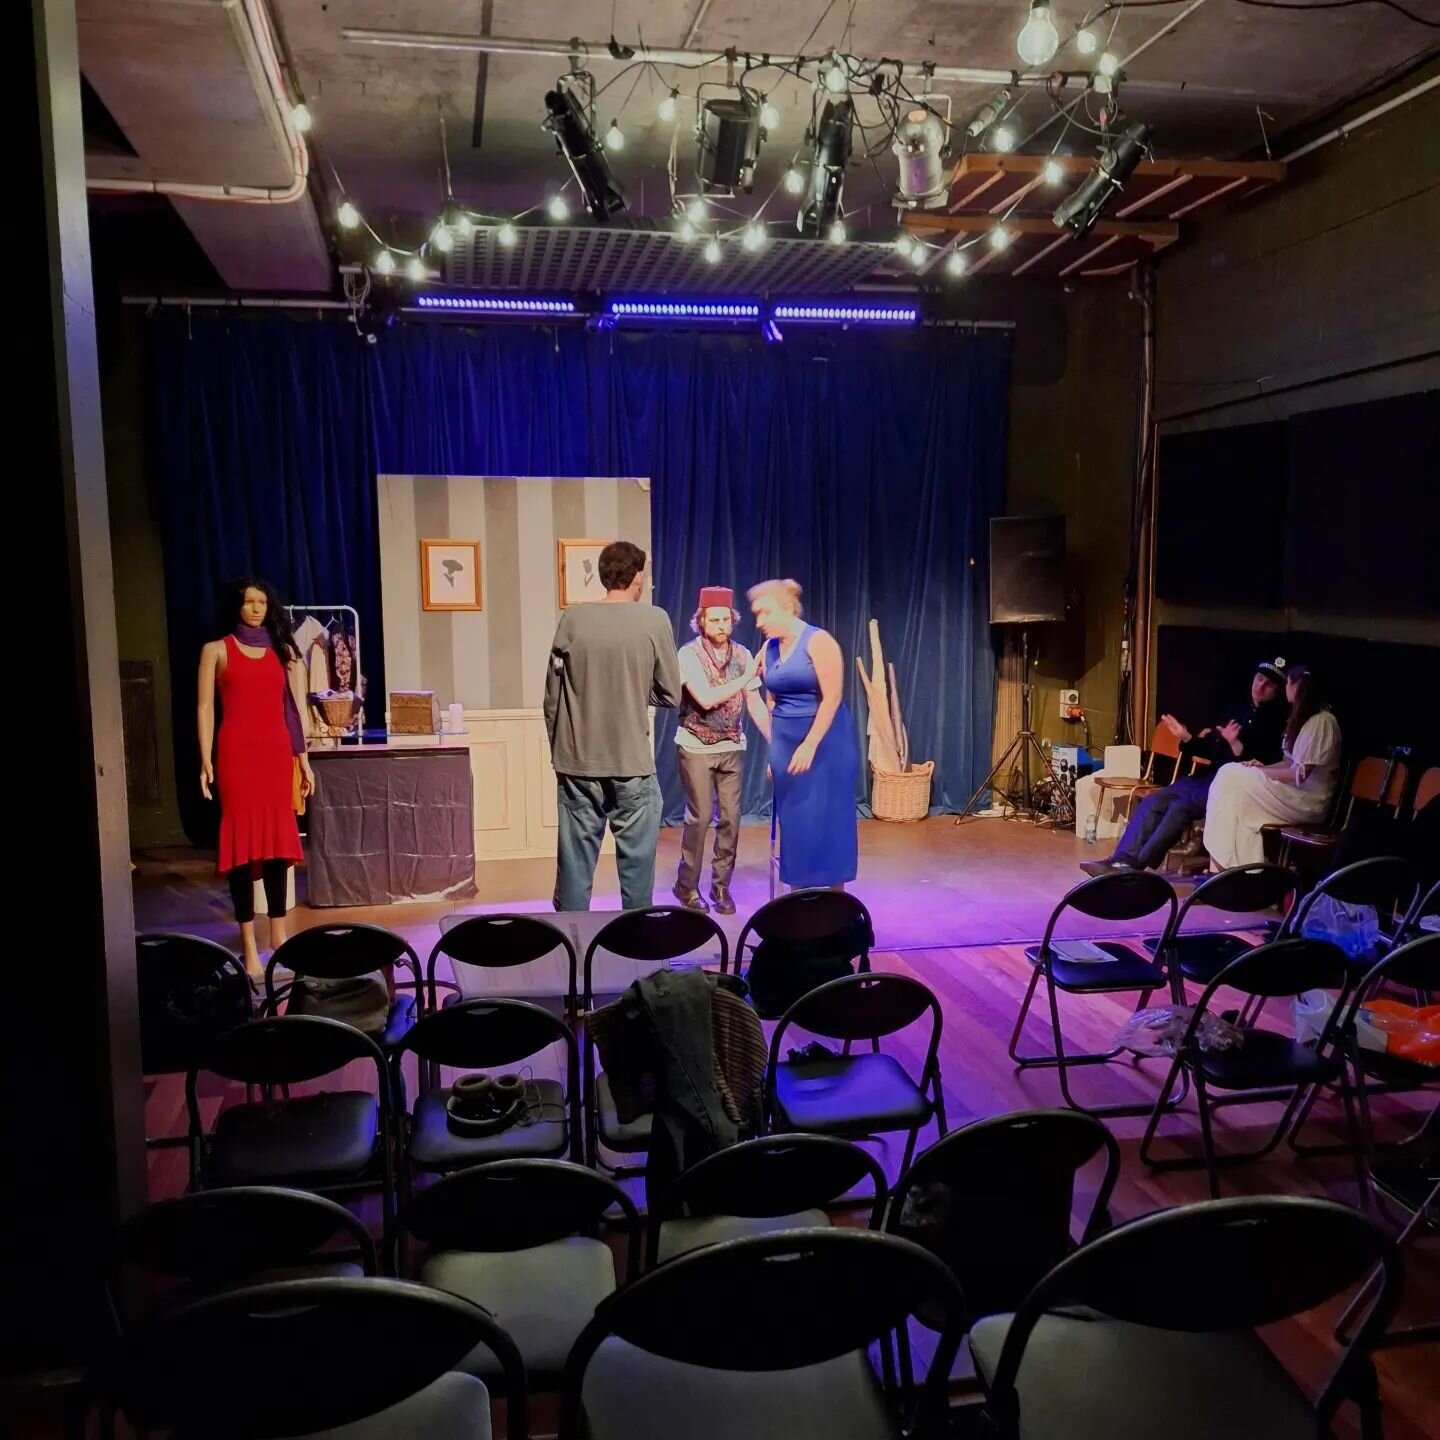 @something_wicked_theatre Having such a wonderful time with The Italian Comedy team. This Wednesday preview is sold out! It's a silly funny comedy where I get to play a villain! Tickets via Something Wicked Theatre Facebook or Instagram.